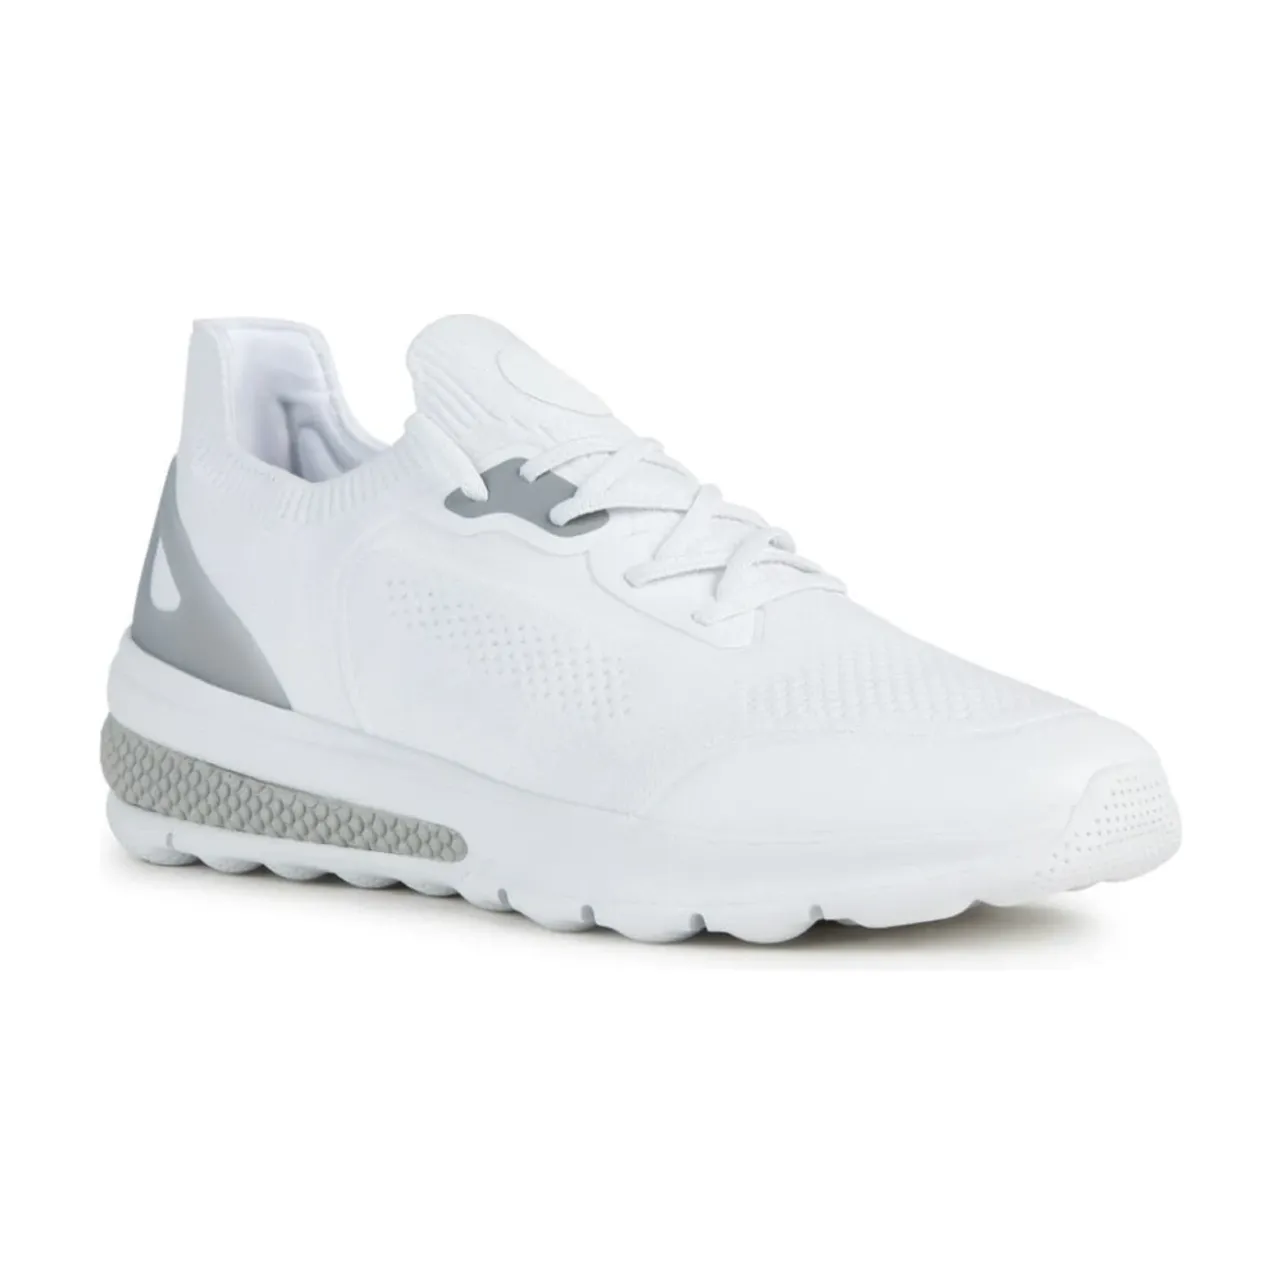 Geox , spherica sport shoes ,White male, Sizes: